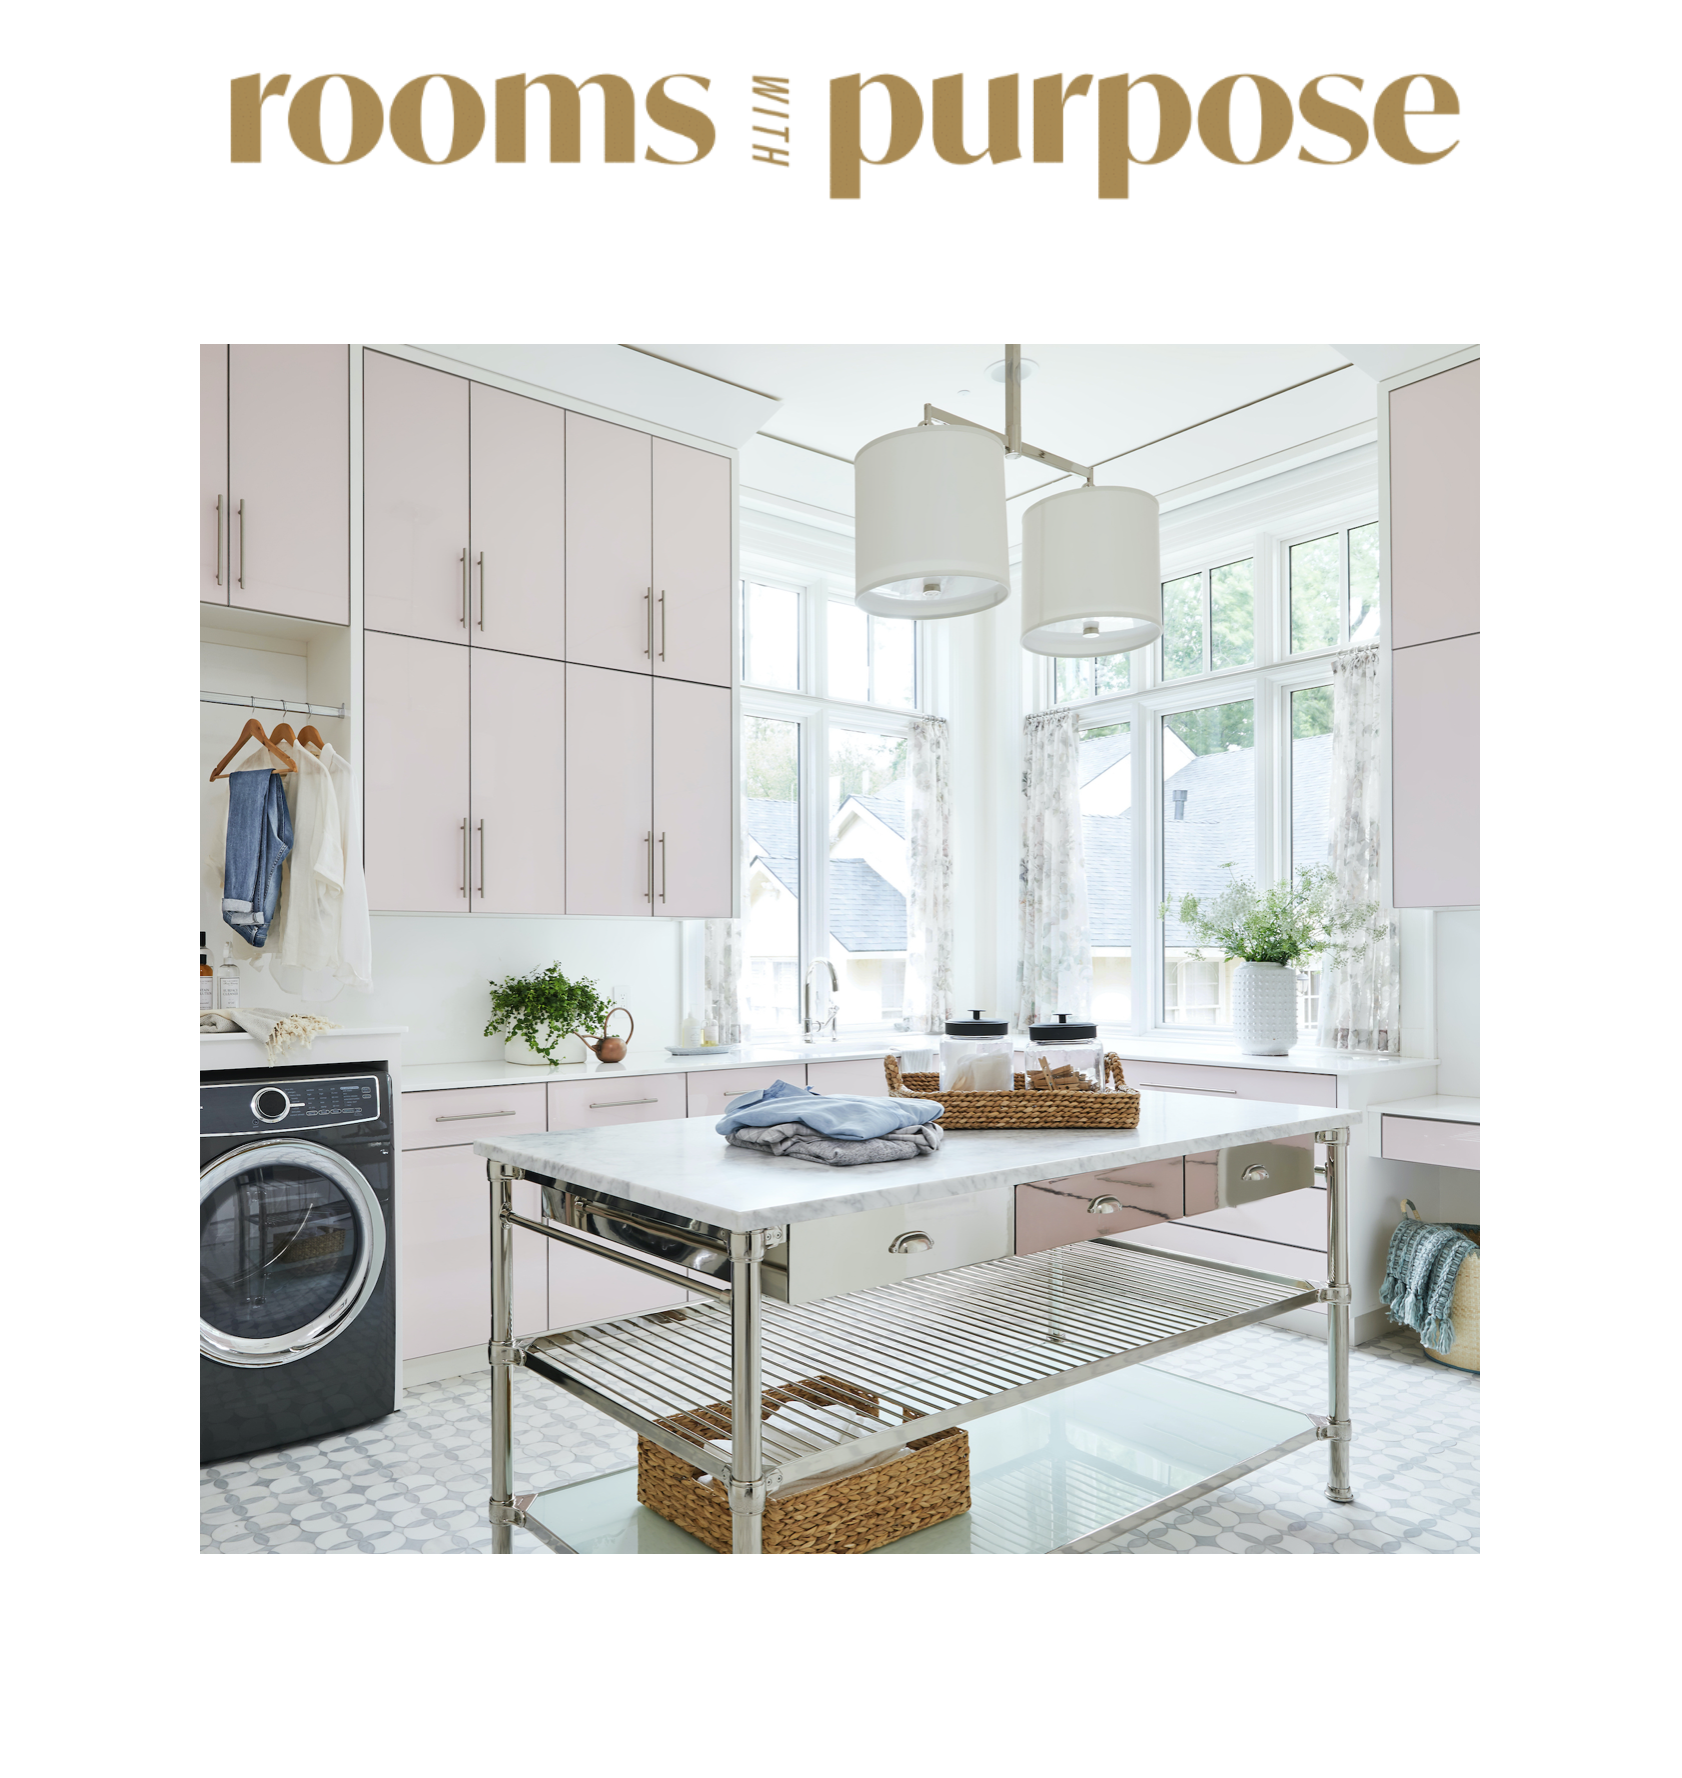 Rooms with Purpose